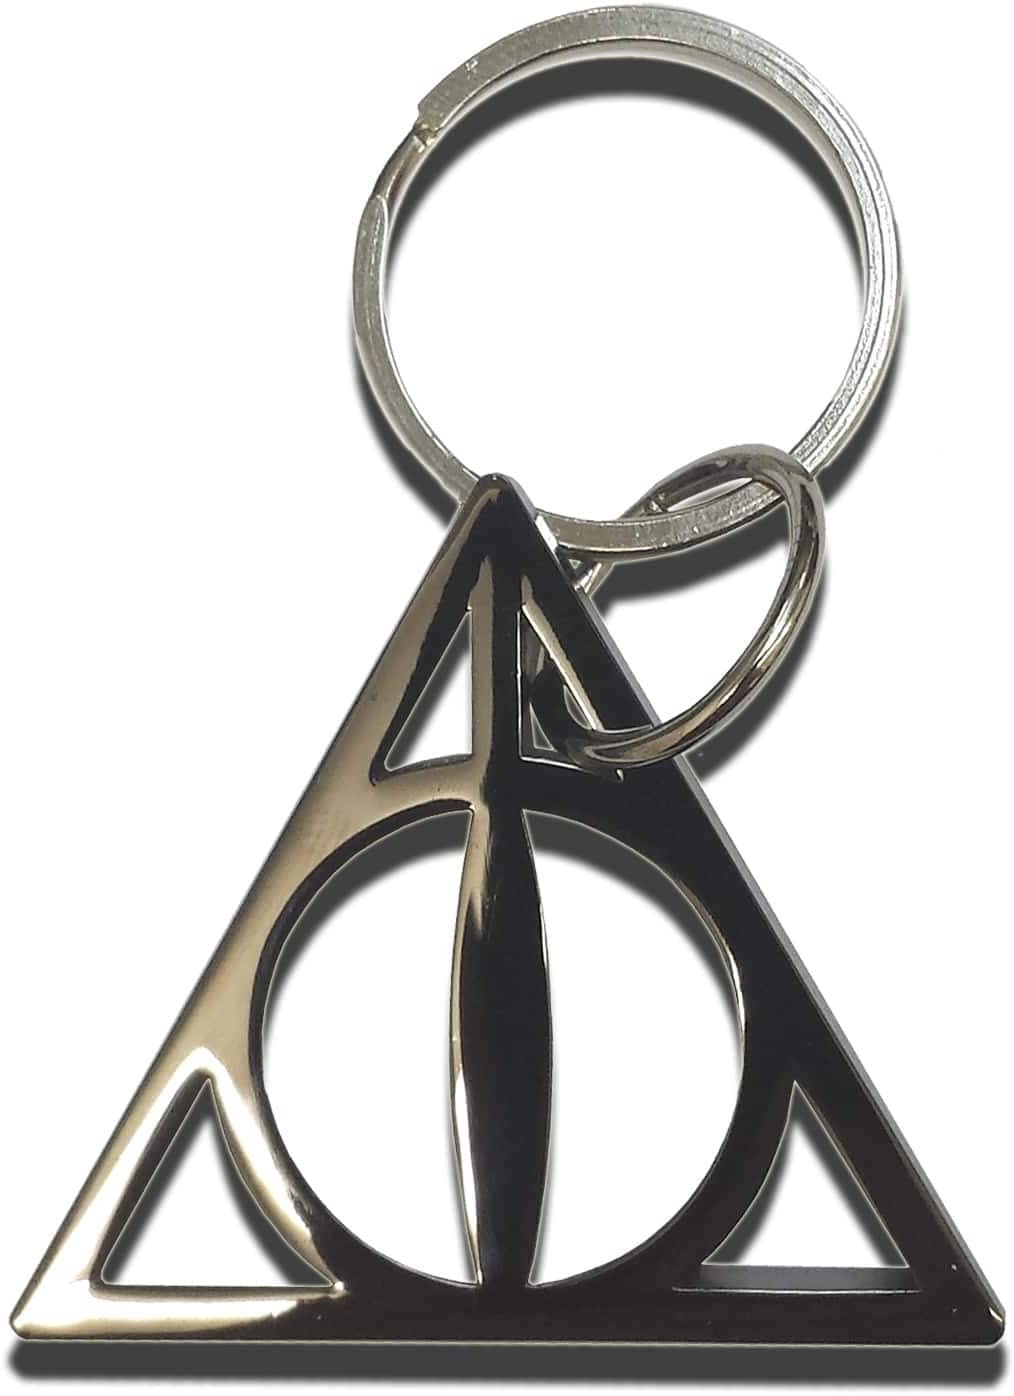 The Noble Collection Harry Potter Deathly Hallows Keychain - 2in (4.5cm) Polished Metal Deathly Hallows Symbol - Harry Potter Film Set Movie Props Gifts Merchandise